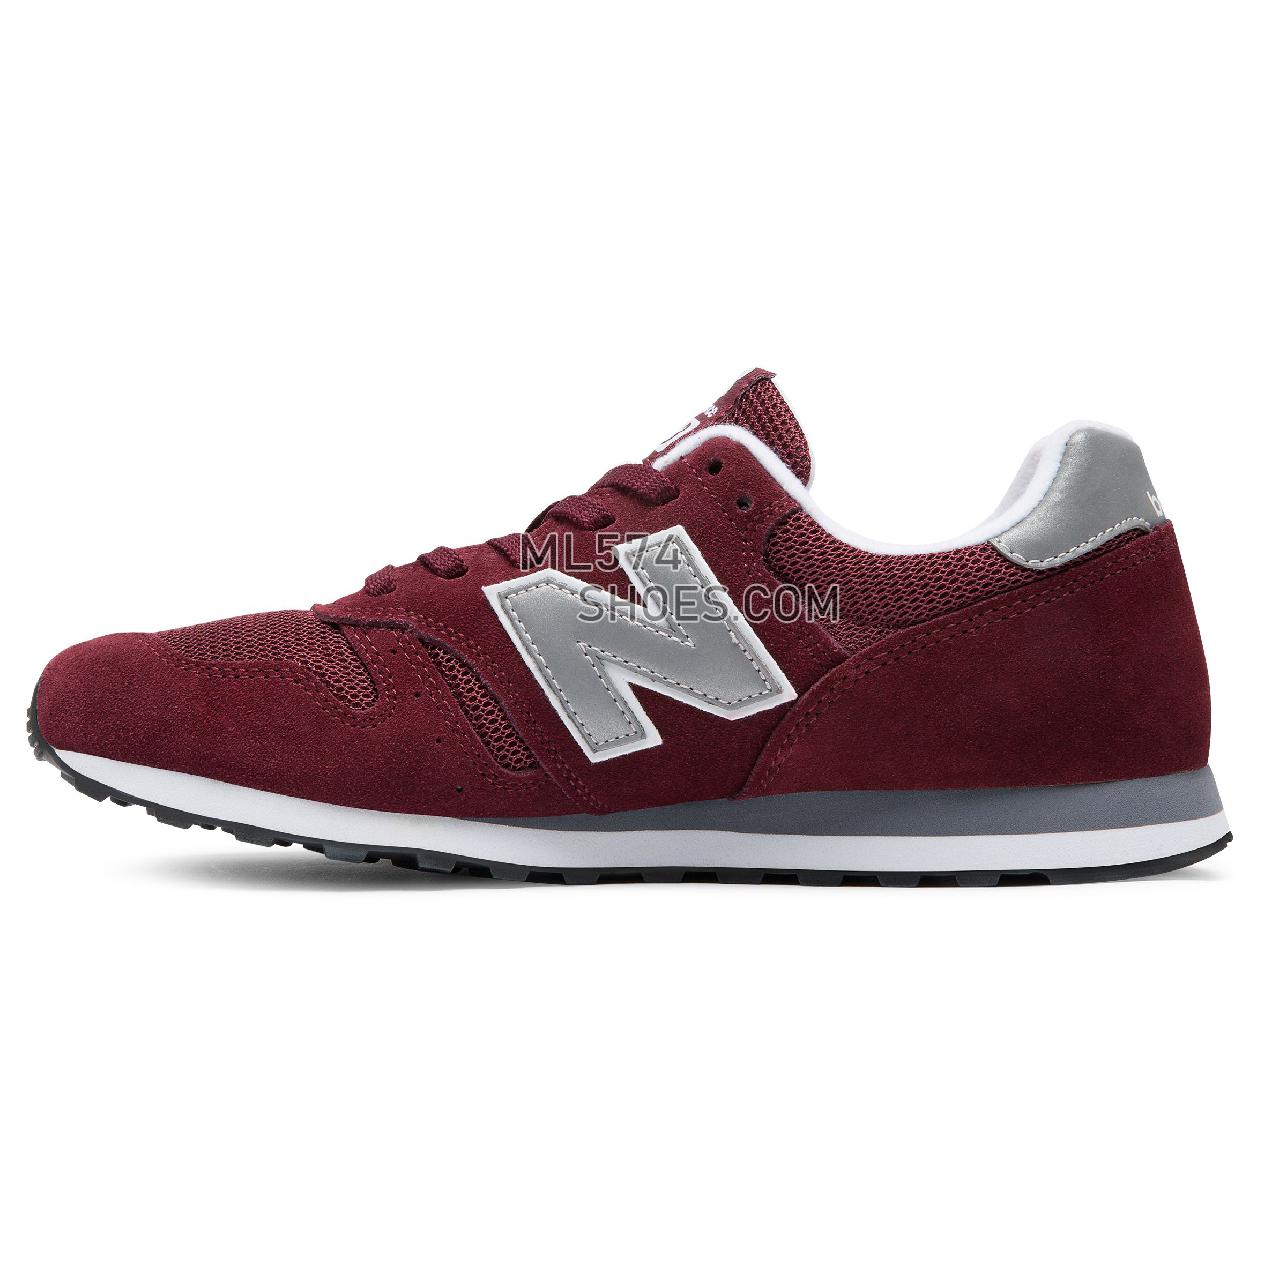 New Balance 373 Modern Classics - Men's Classic Sneakers - Burgundy with Silver - ML373BN